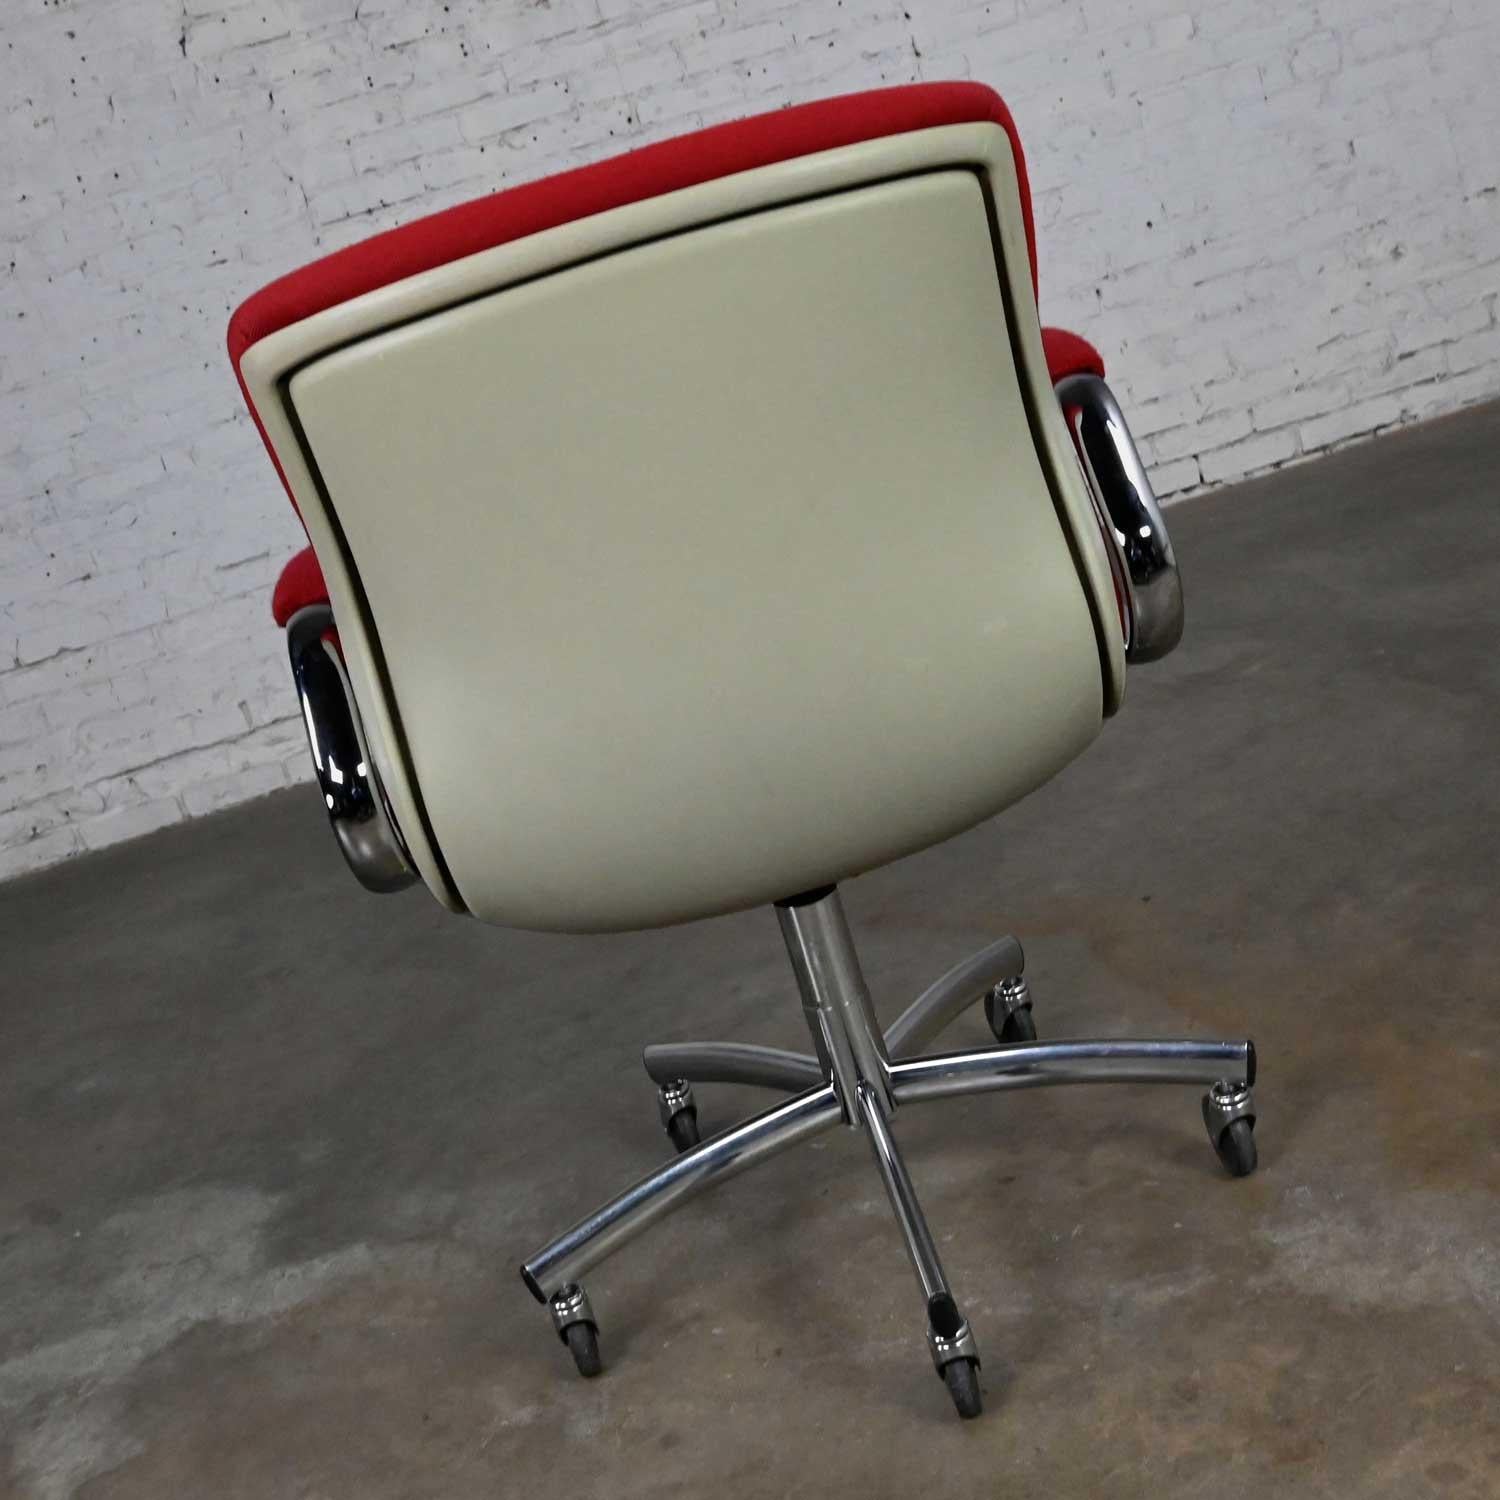 Metal Modern Steelcase Chrome & Red Swivel Rolling Chair #454 Style Charles Pollock For Sale